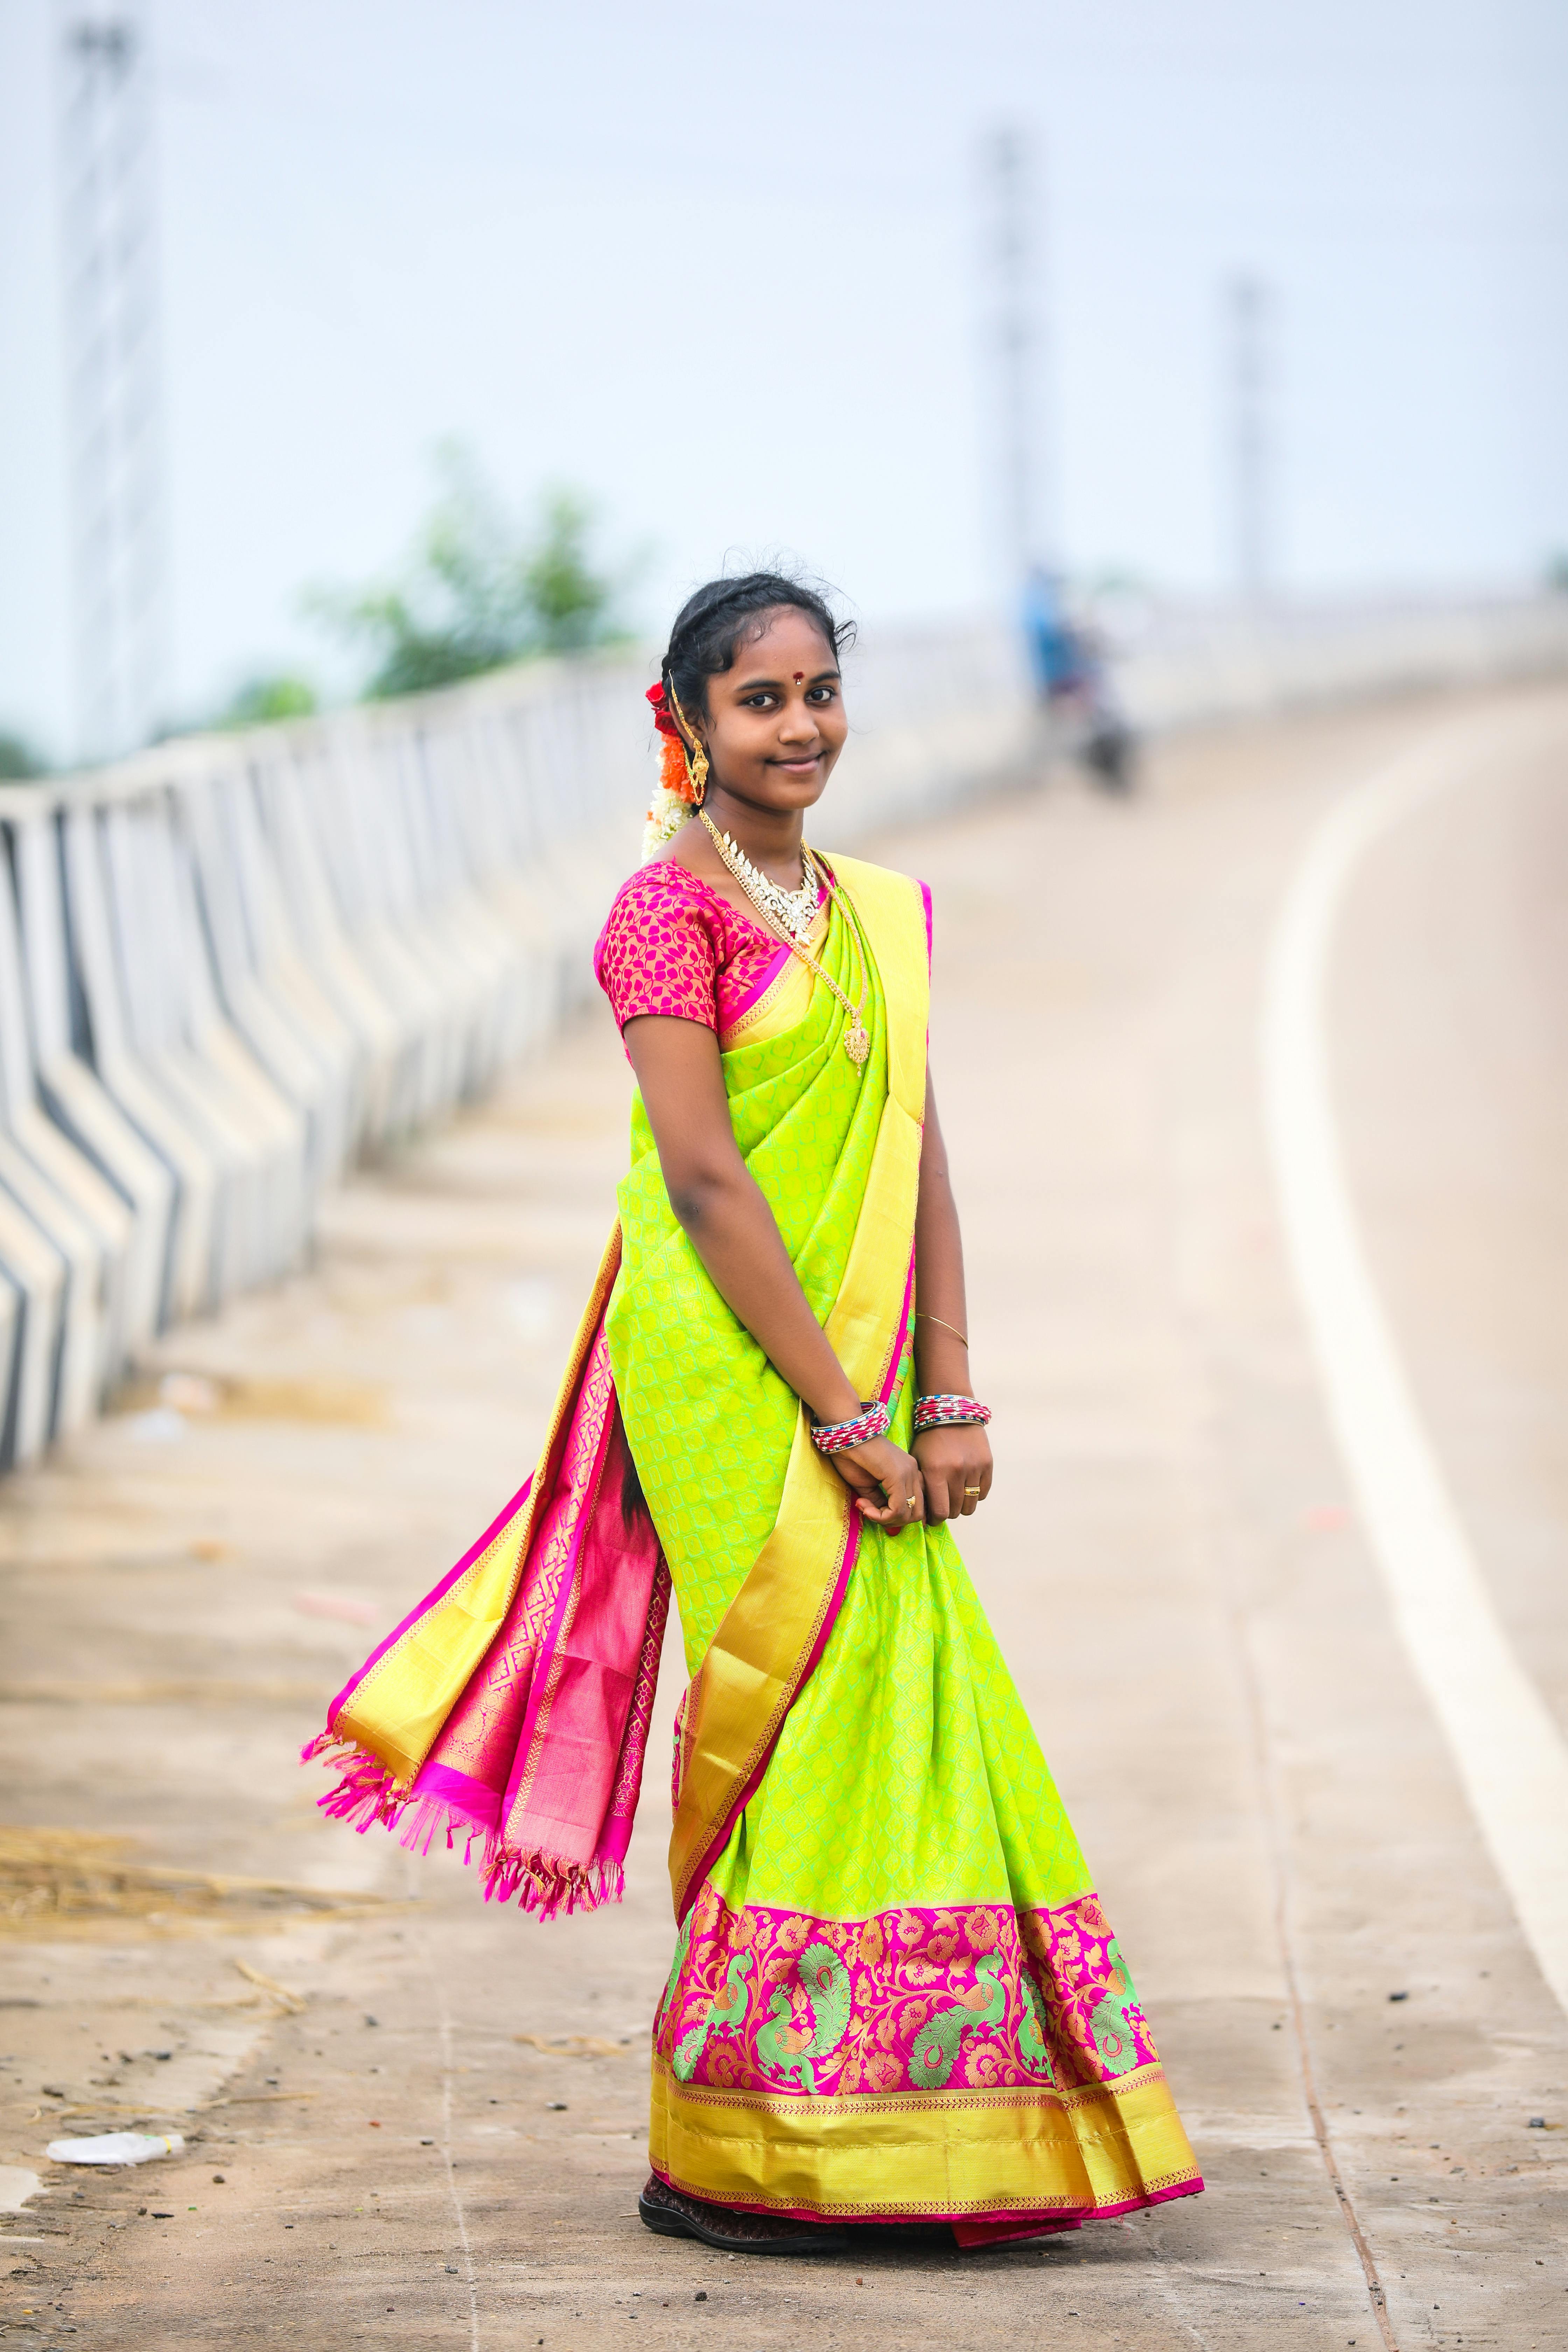 A Woman in Pink Sari Standing and Posing · Free Stock Photo